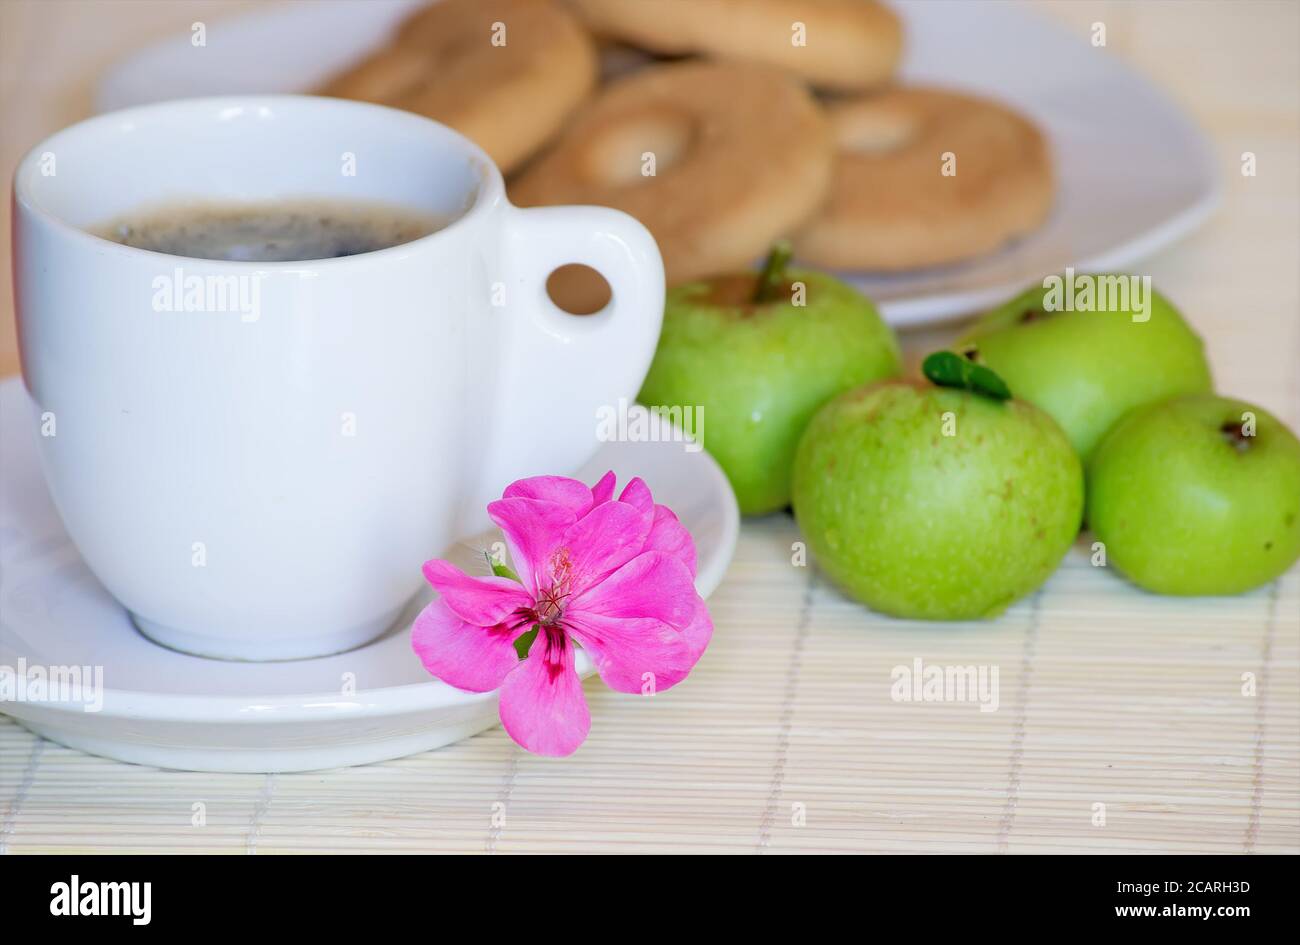 close up of a pink flower on a breakfast set Stock Photo